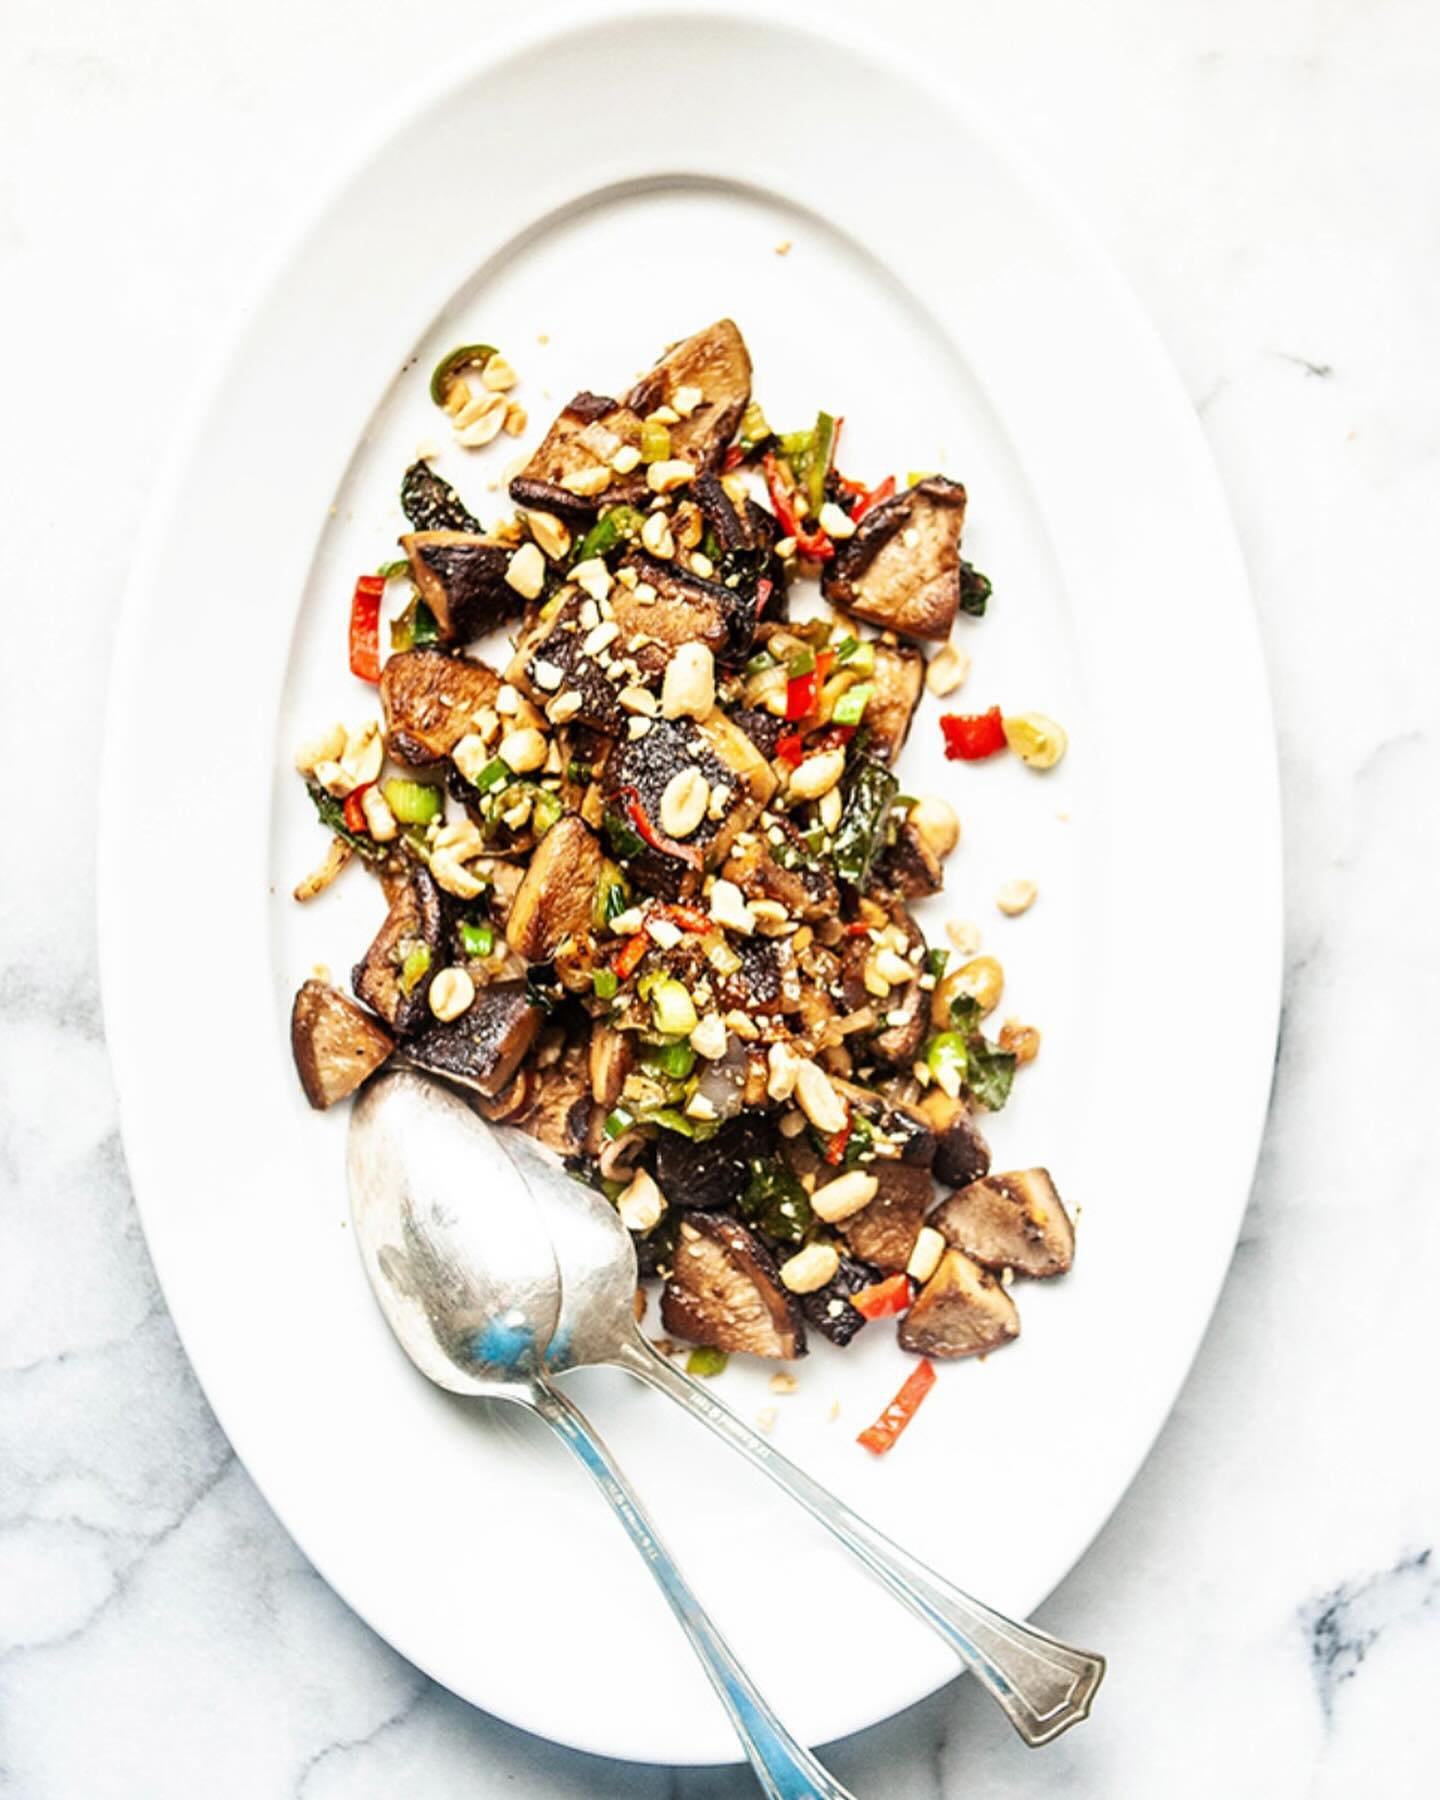 BEAUTIFUL FOOD BY DESIGN | You will love this plant-based take on Larb, the classic Thai spicy salad. Traditional with ground meat but here the mushrooms are the stars in Stir-Fry Mushroom Larb, another Little Jewel from the Kitchen.

TAP BIO FOR REC